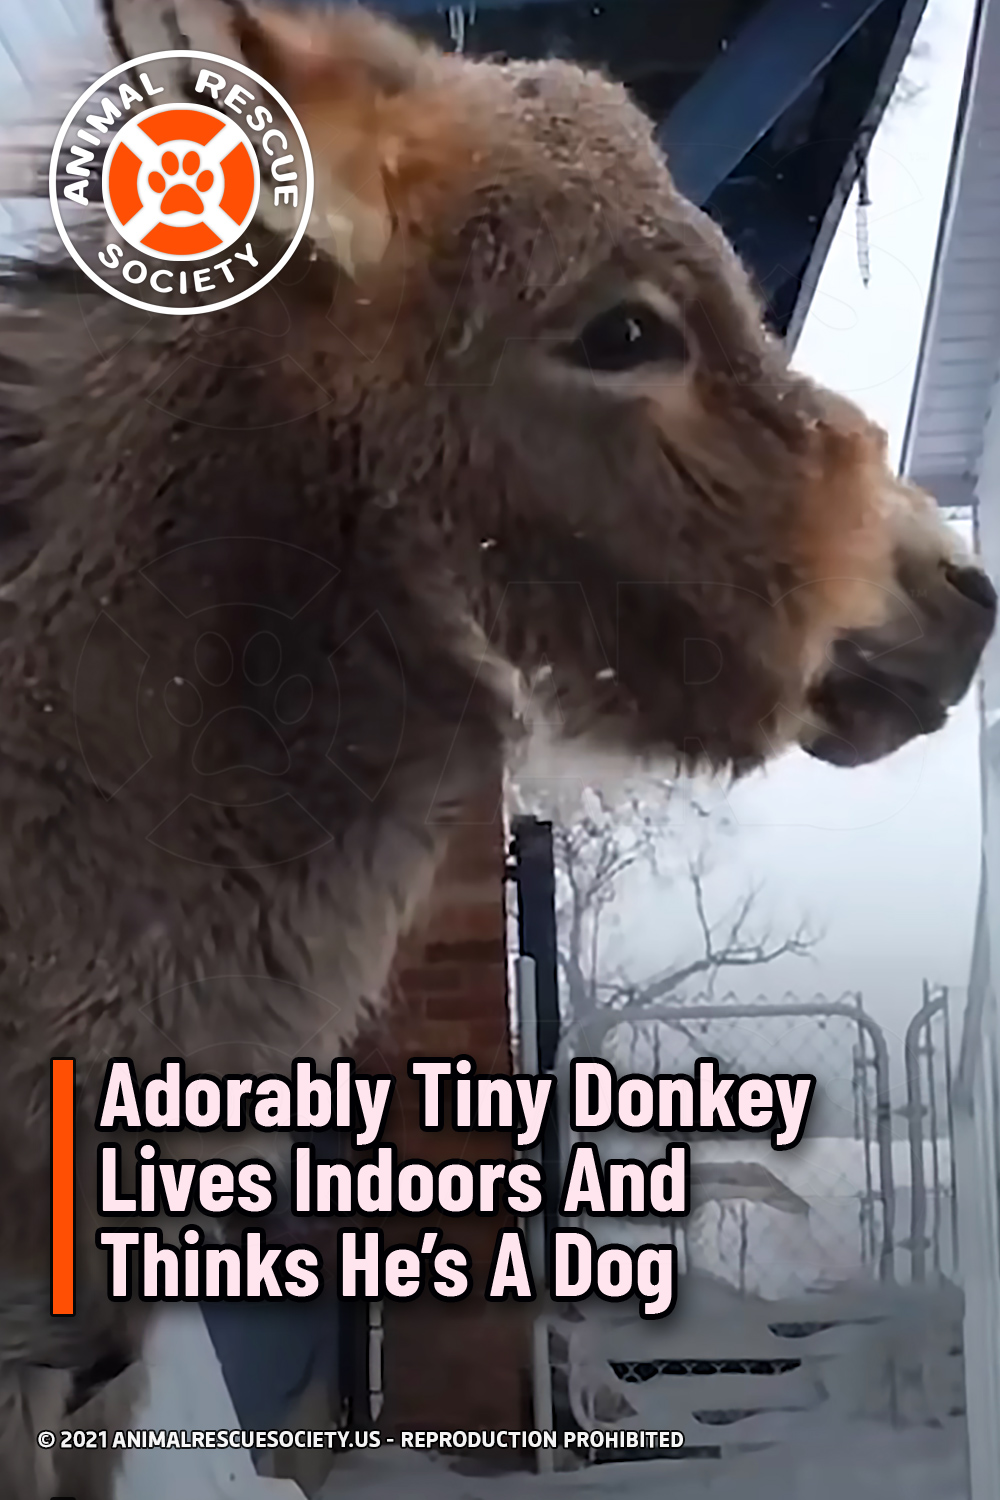 Adorably Tiny Donkey Lives Indoors And Thinks He’s A Dog